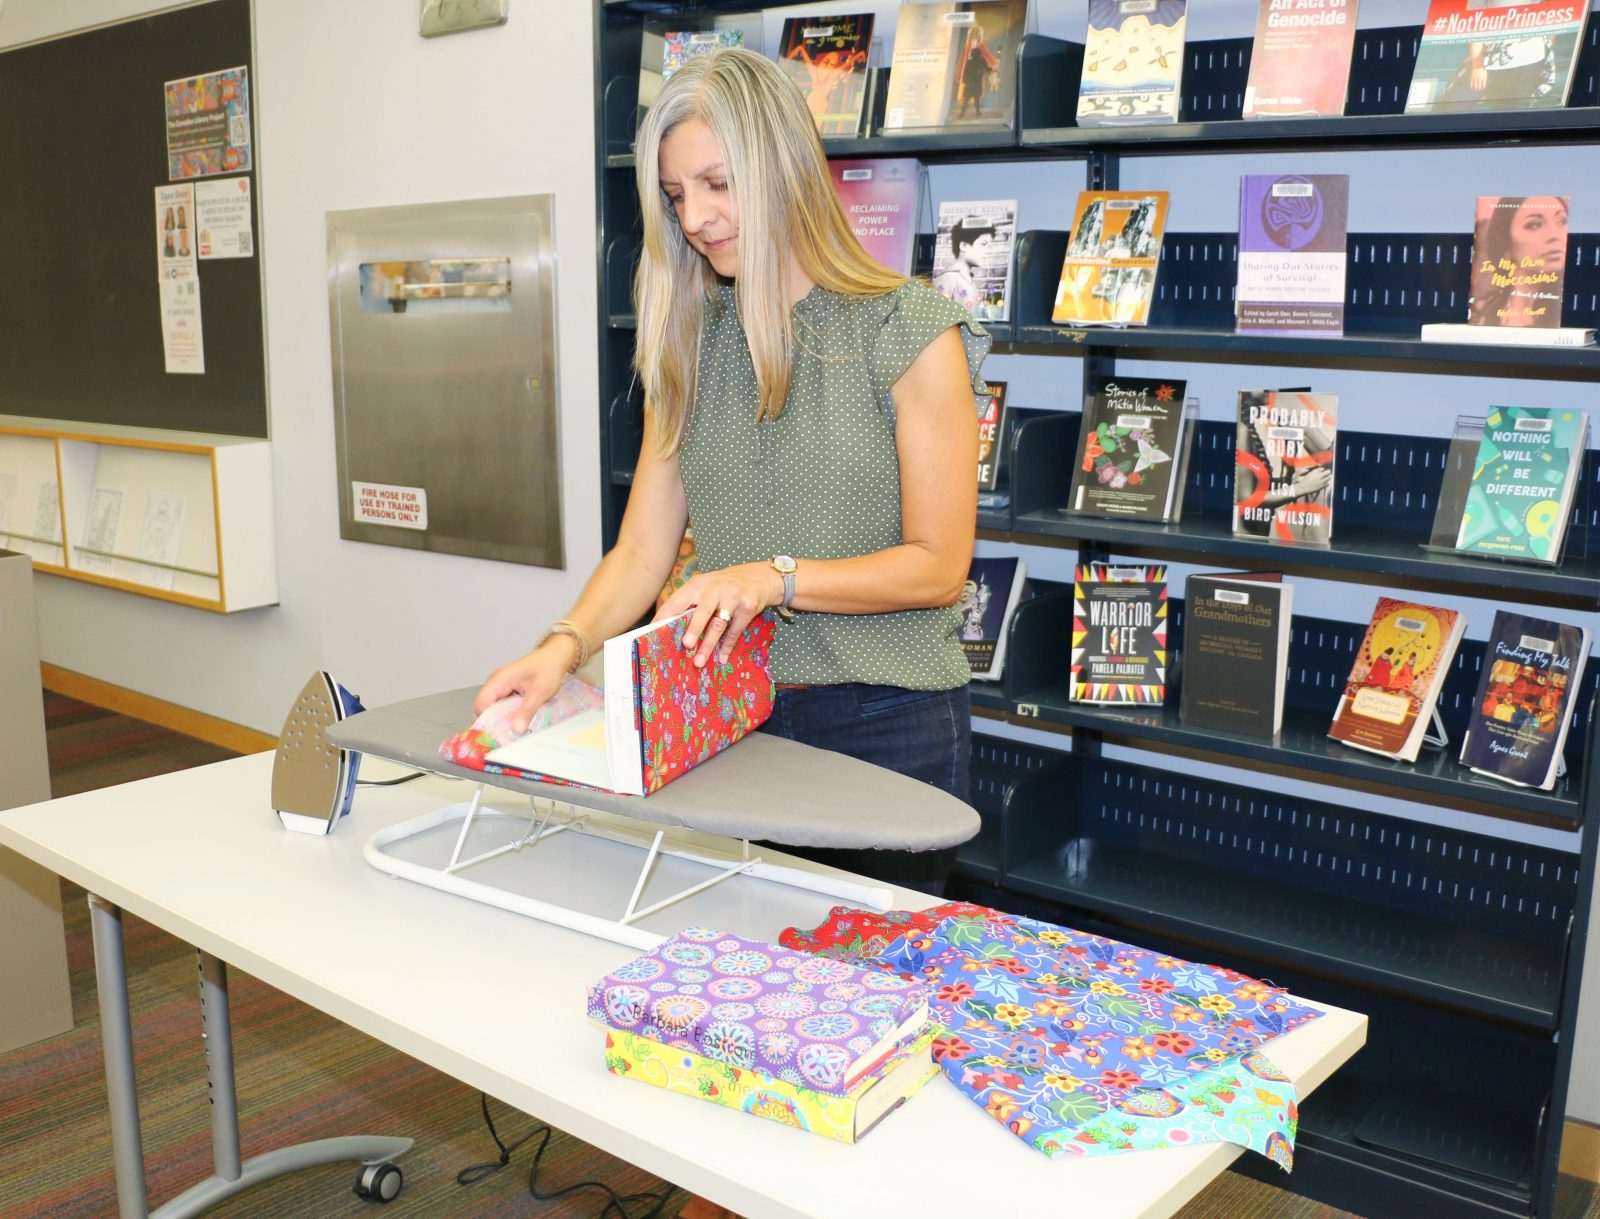 A woman places books within decorative cloth wraps while standing at a table in an indoor library.